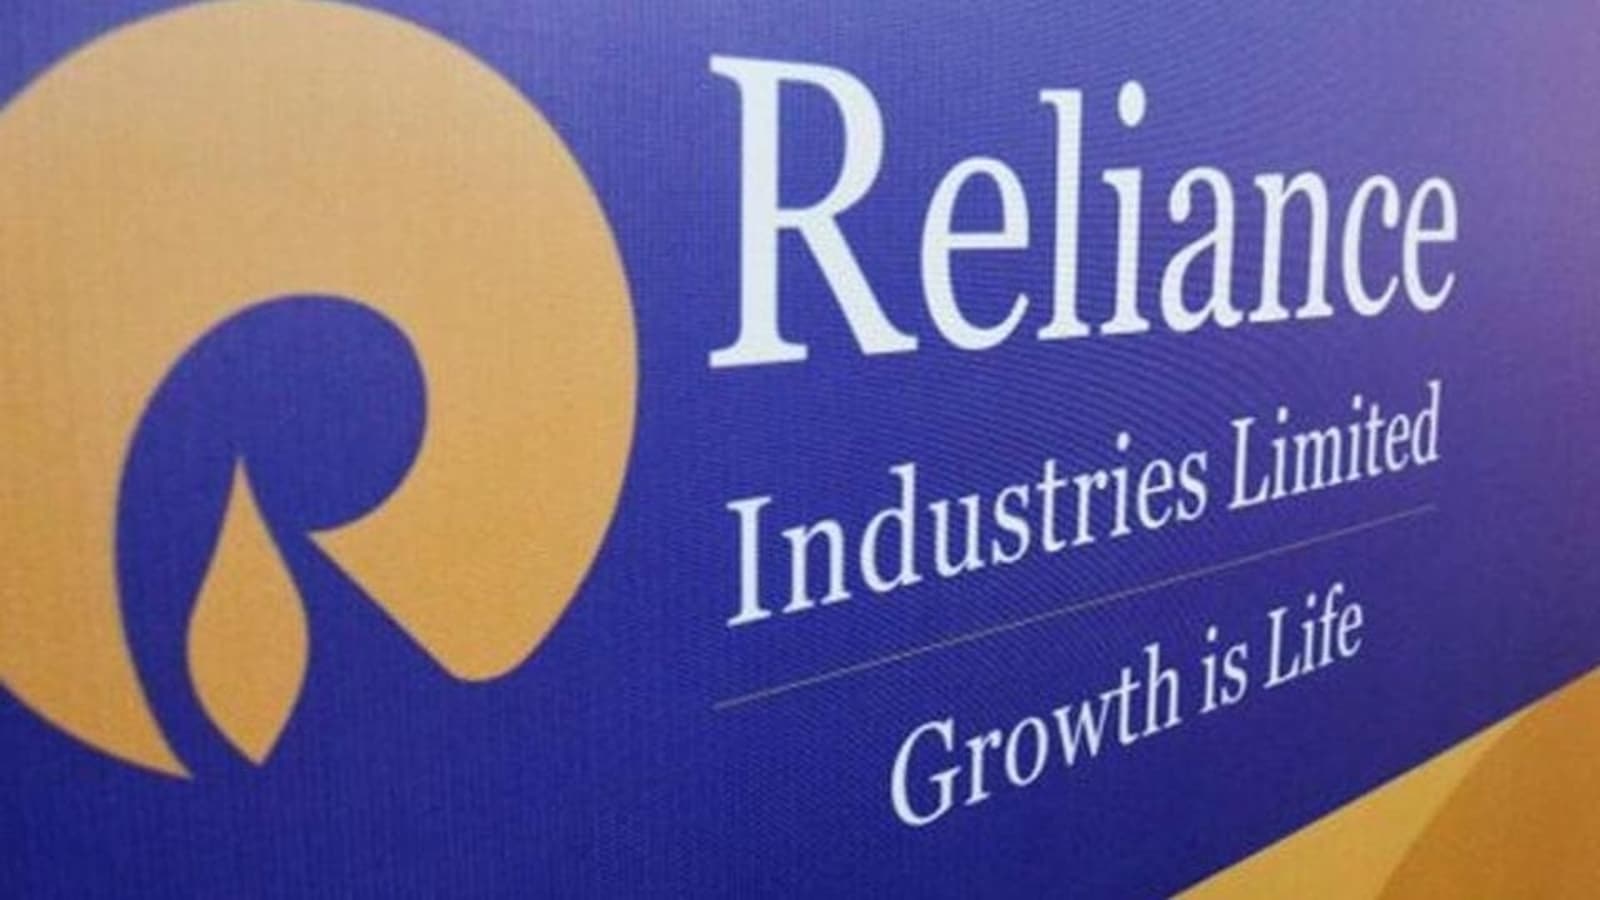 https://images.hindustantimes.com/img/2022/05/06/1600x900/industries-outside-general-company-meeting-installed-reliance_fa10d548-42b1-11eb-ba42-7bdceb016500_1651853605224.jpg